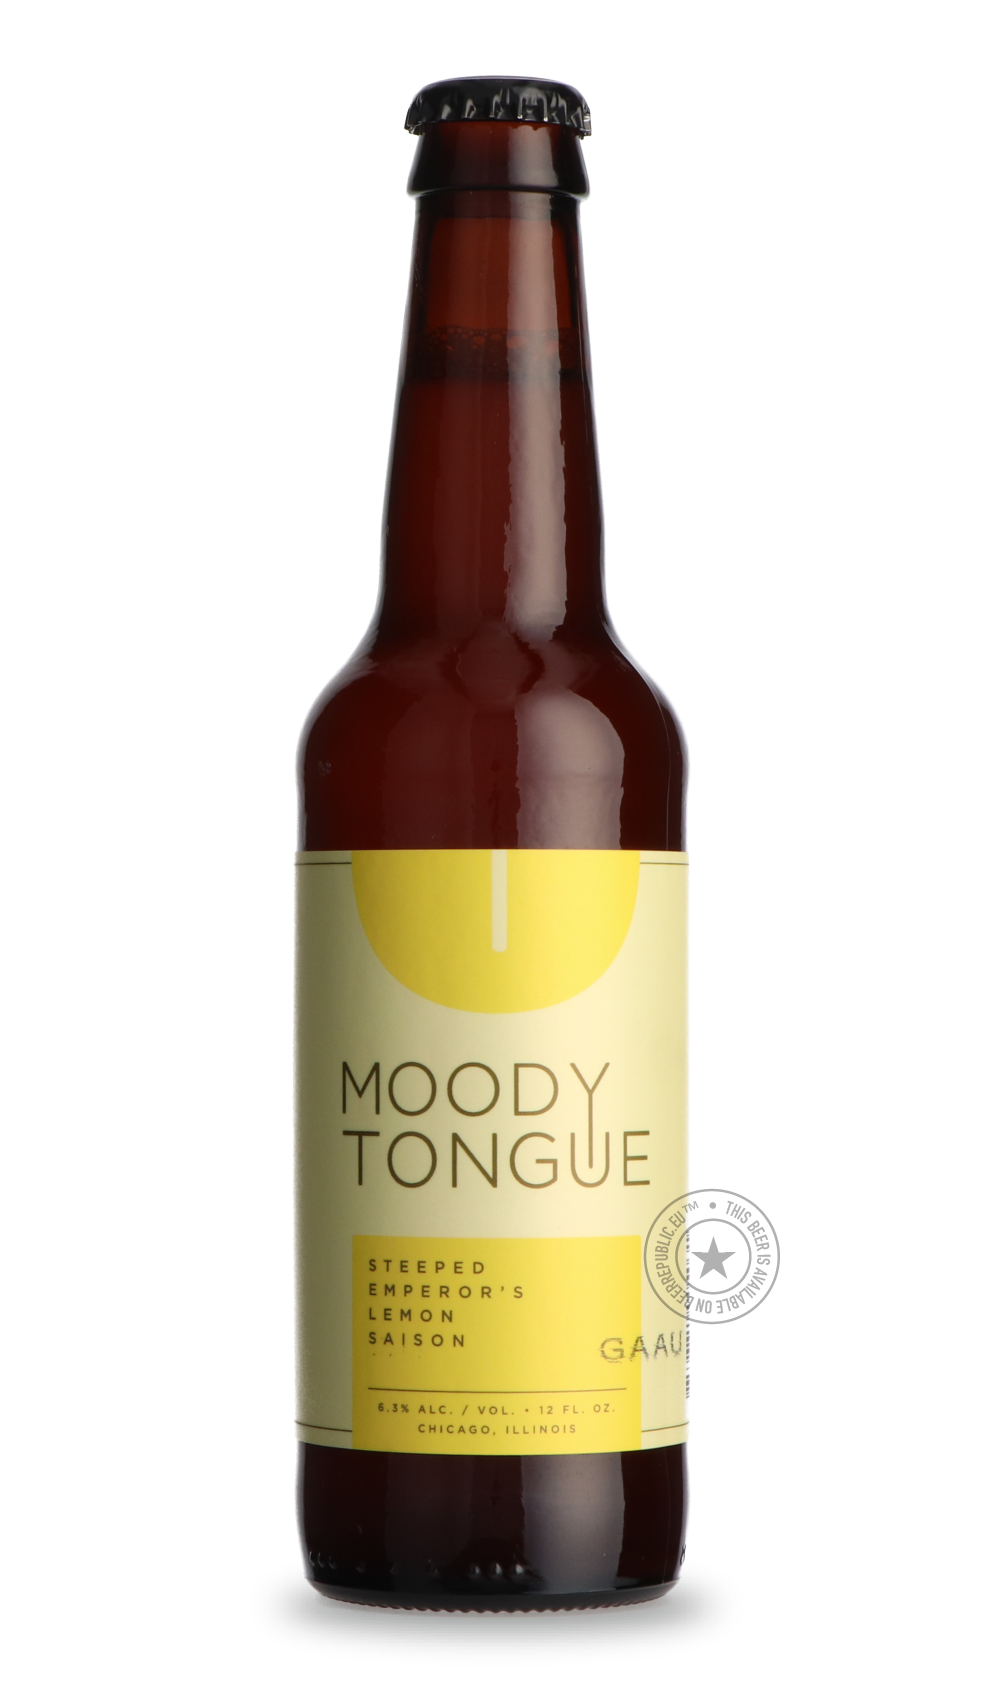 -Moody Tongue- Steeped Emperor's Lemon Saison-Sour / Wild & Fruity- Only @ Beer Republic - The best online beer store for American & Canadian craft beer - Buy beer online from the USA and Canada - Bier online kopen - Amerikaans bier kopen - Craft beer store - Craft beer kopen - Amerikanisch bier kaufen - Bier online kaufen - Acheter biere online - IPA - Stout - Porter - New England IPA - Hazy IPA - Imperial Stout - Barrel Aged - Barrel Aged Imperial Stout - Brown - Dark beer - Blond - Blonde - Pilsner - Lag